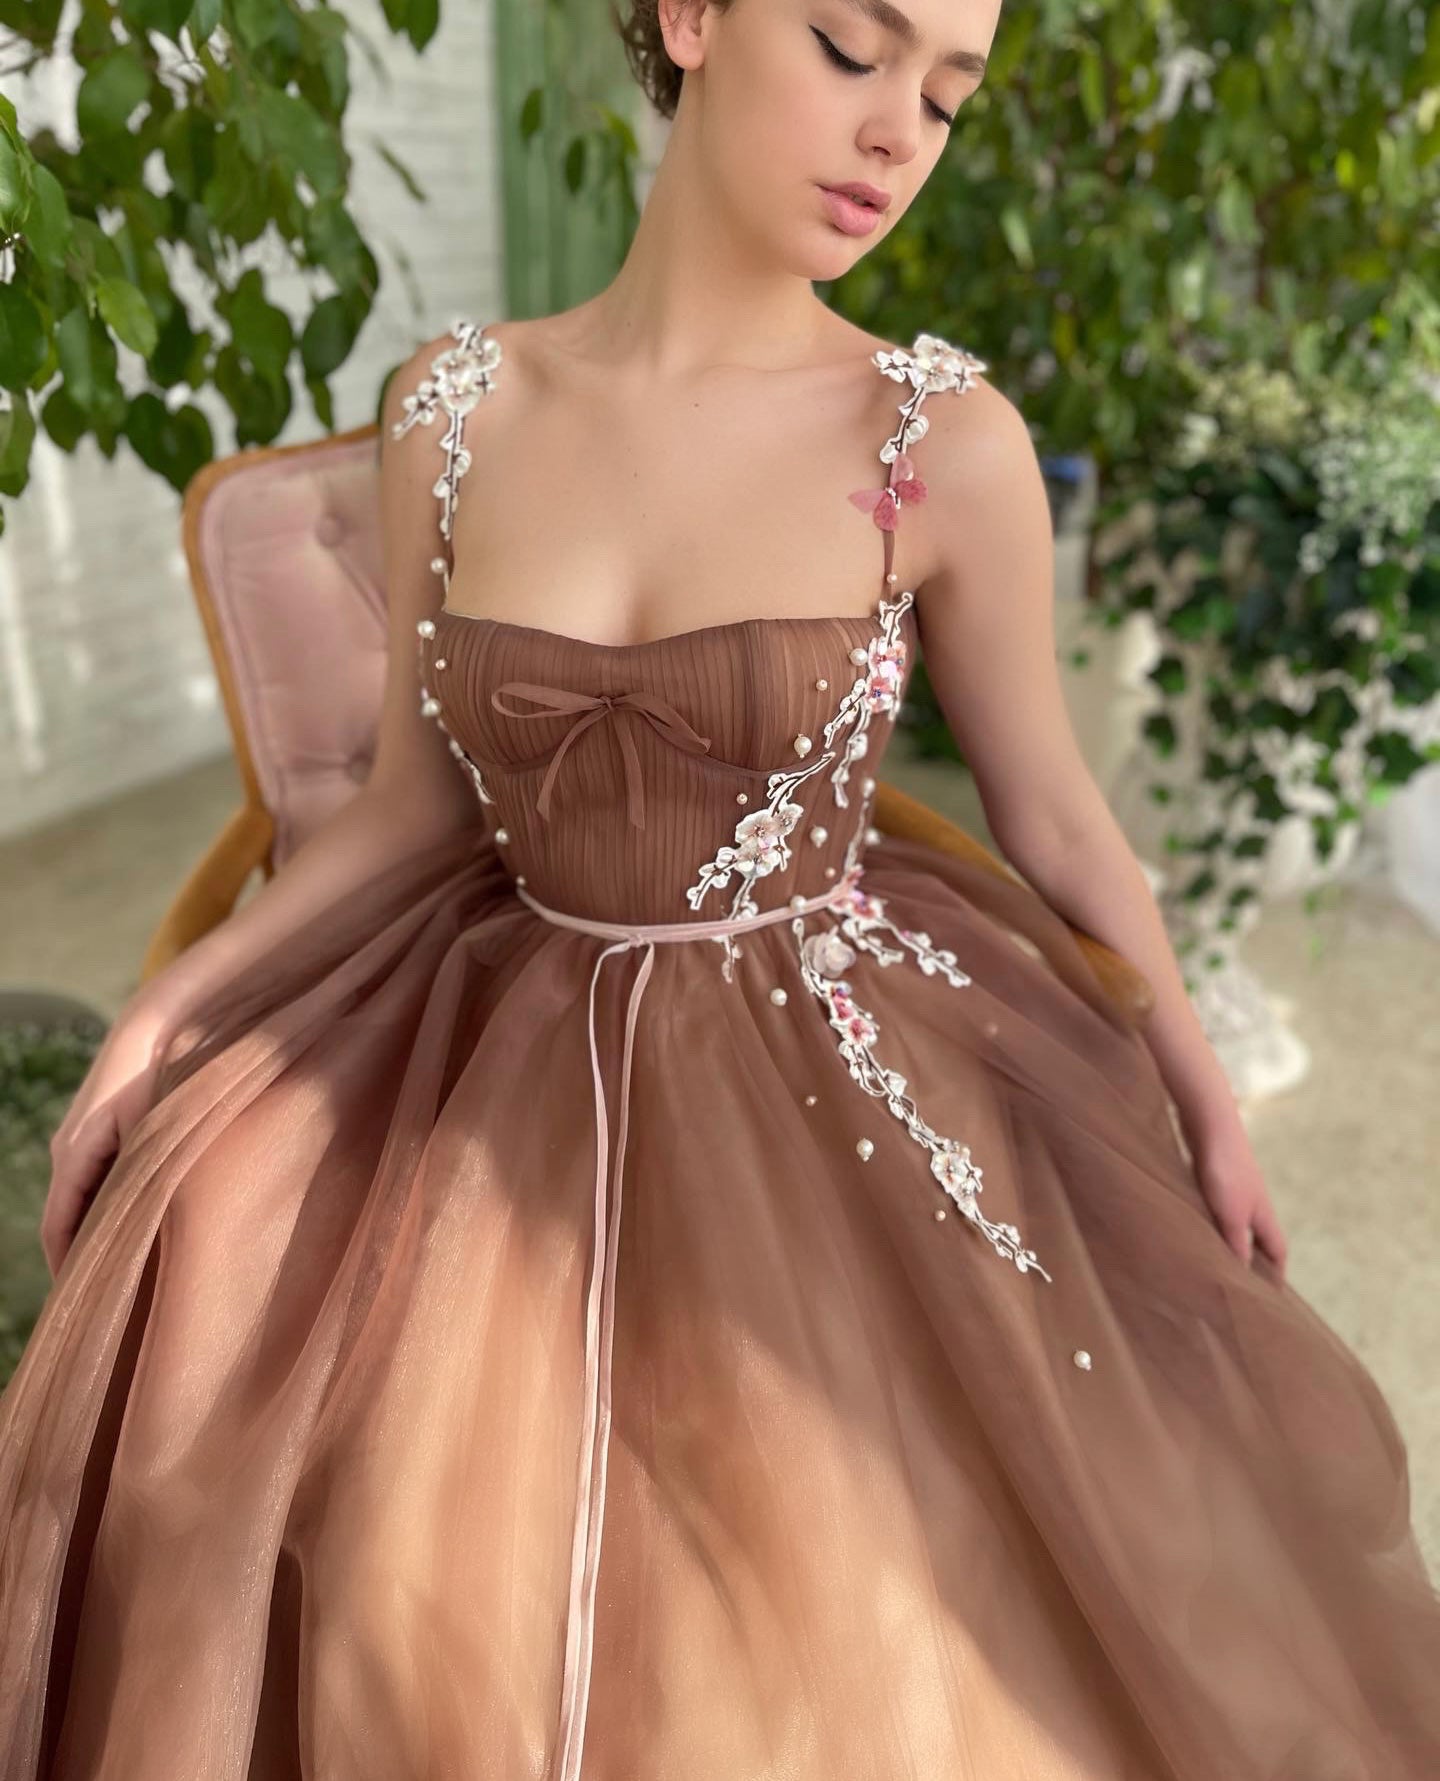 Brown A-Line dress with spaghetti straps and embroidery